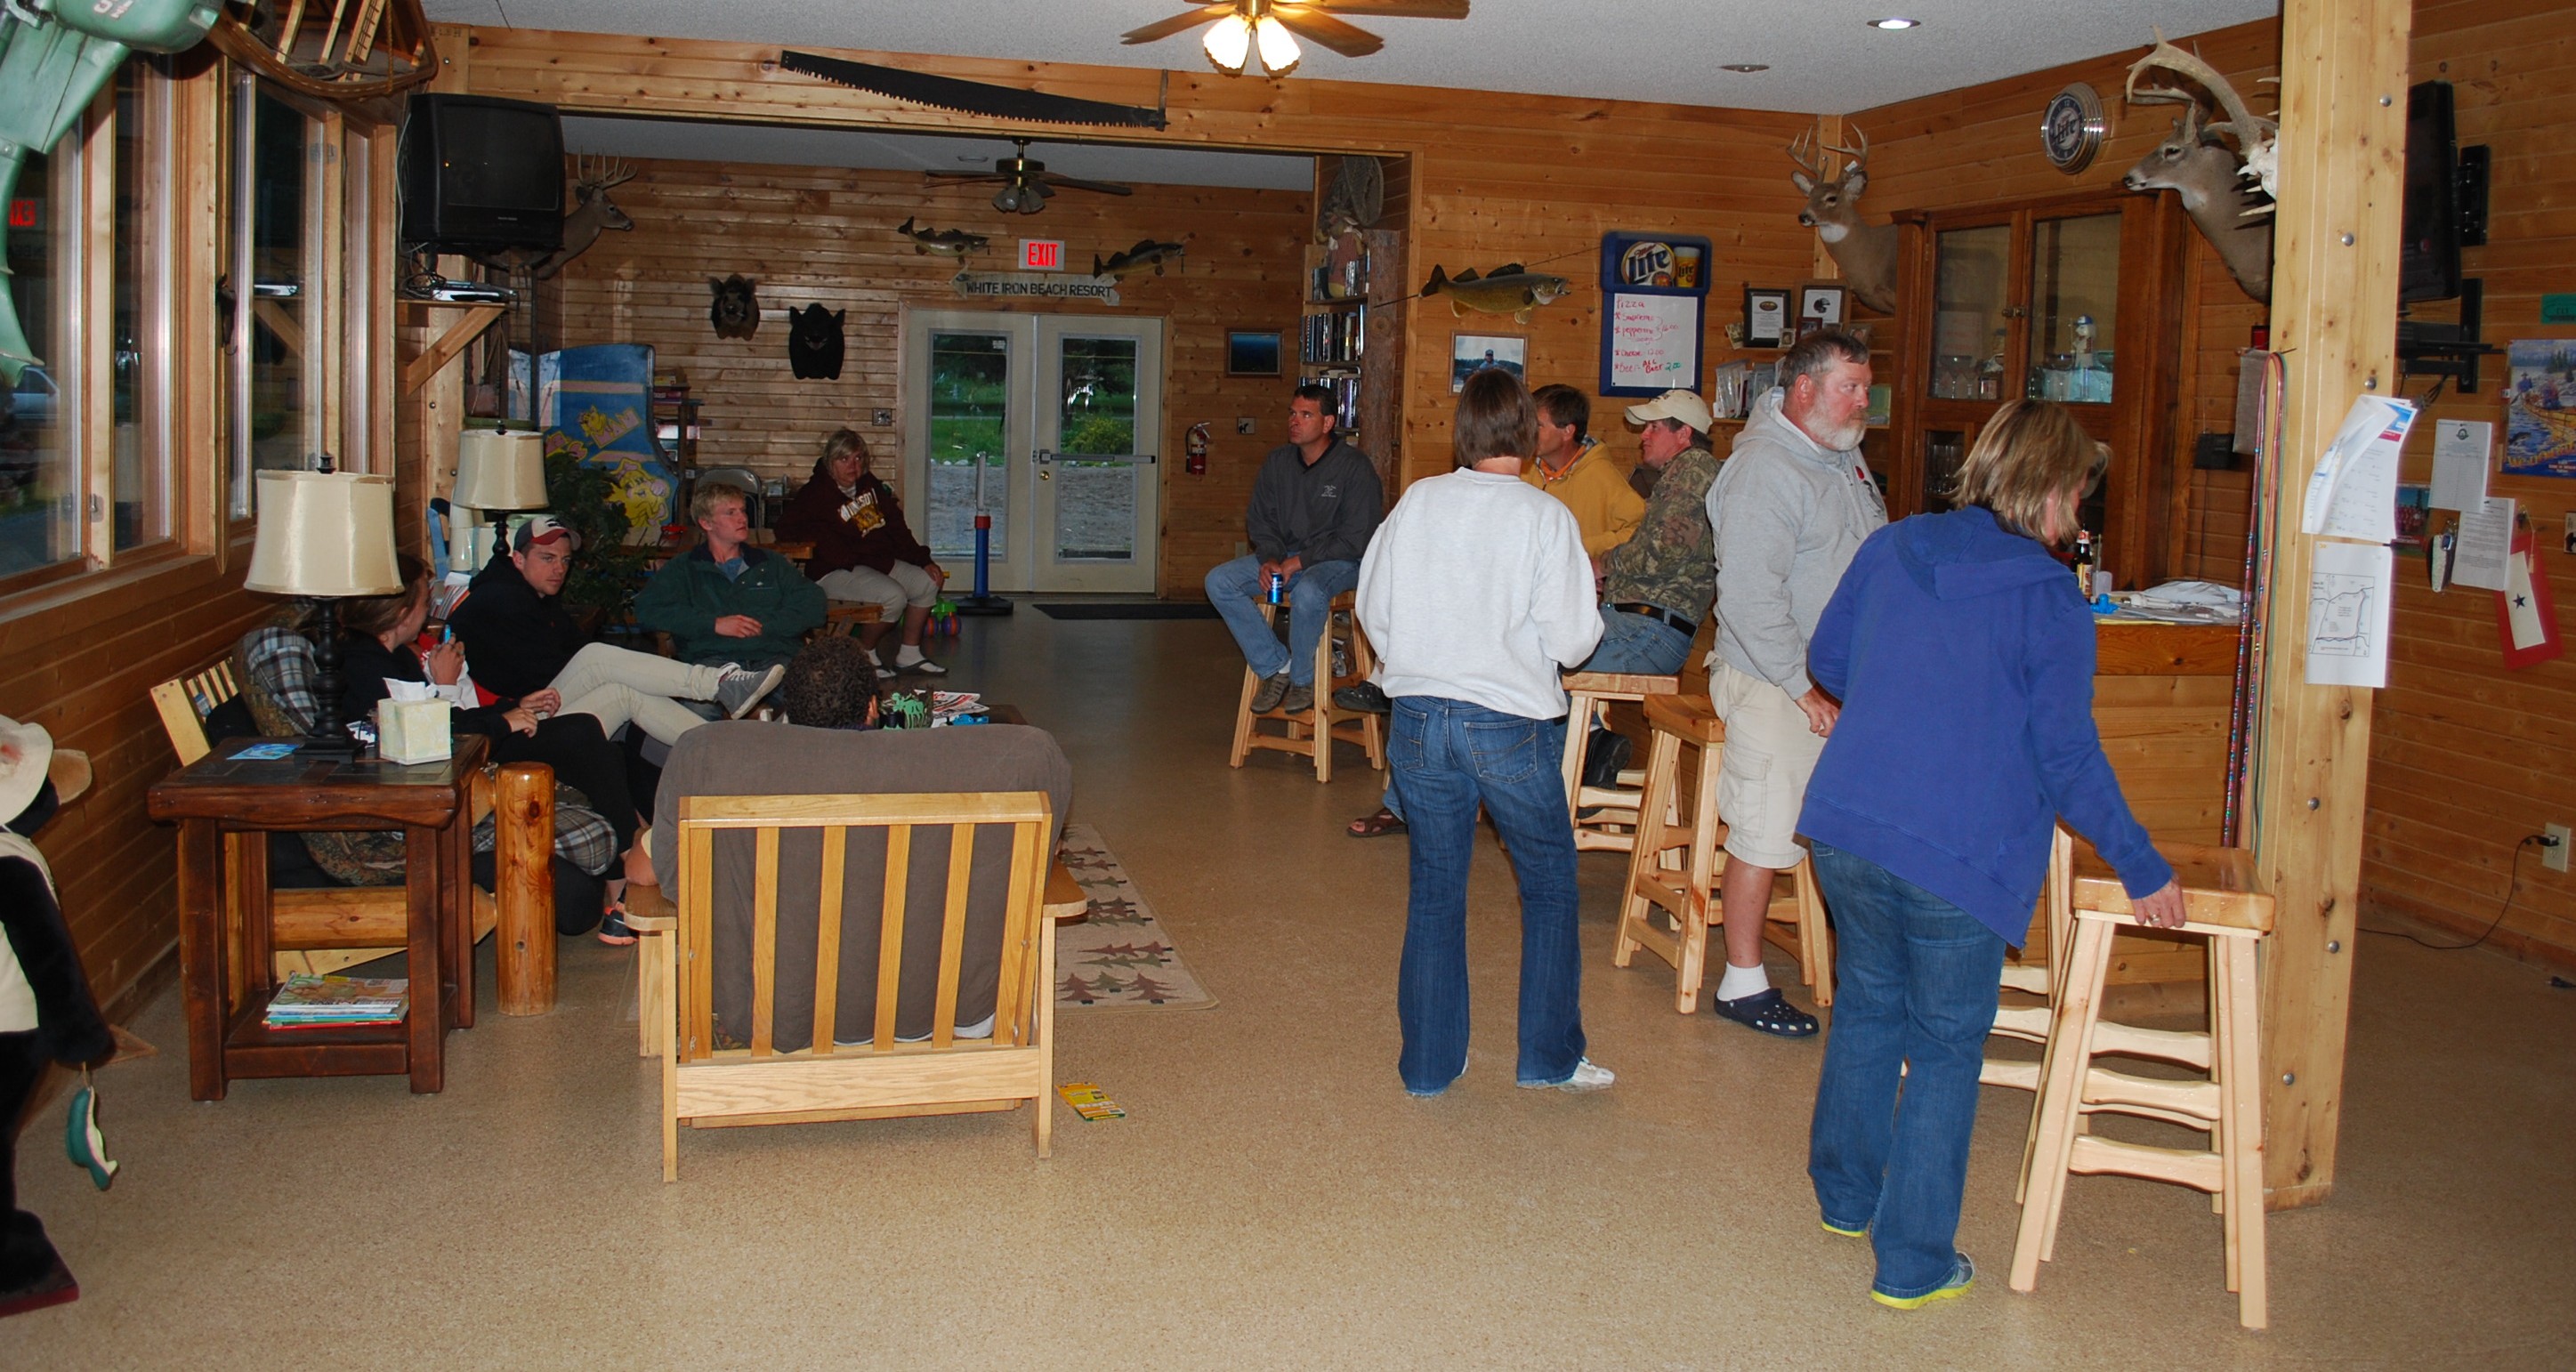 Group in Lodge